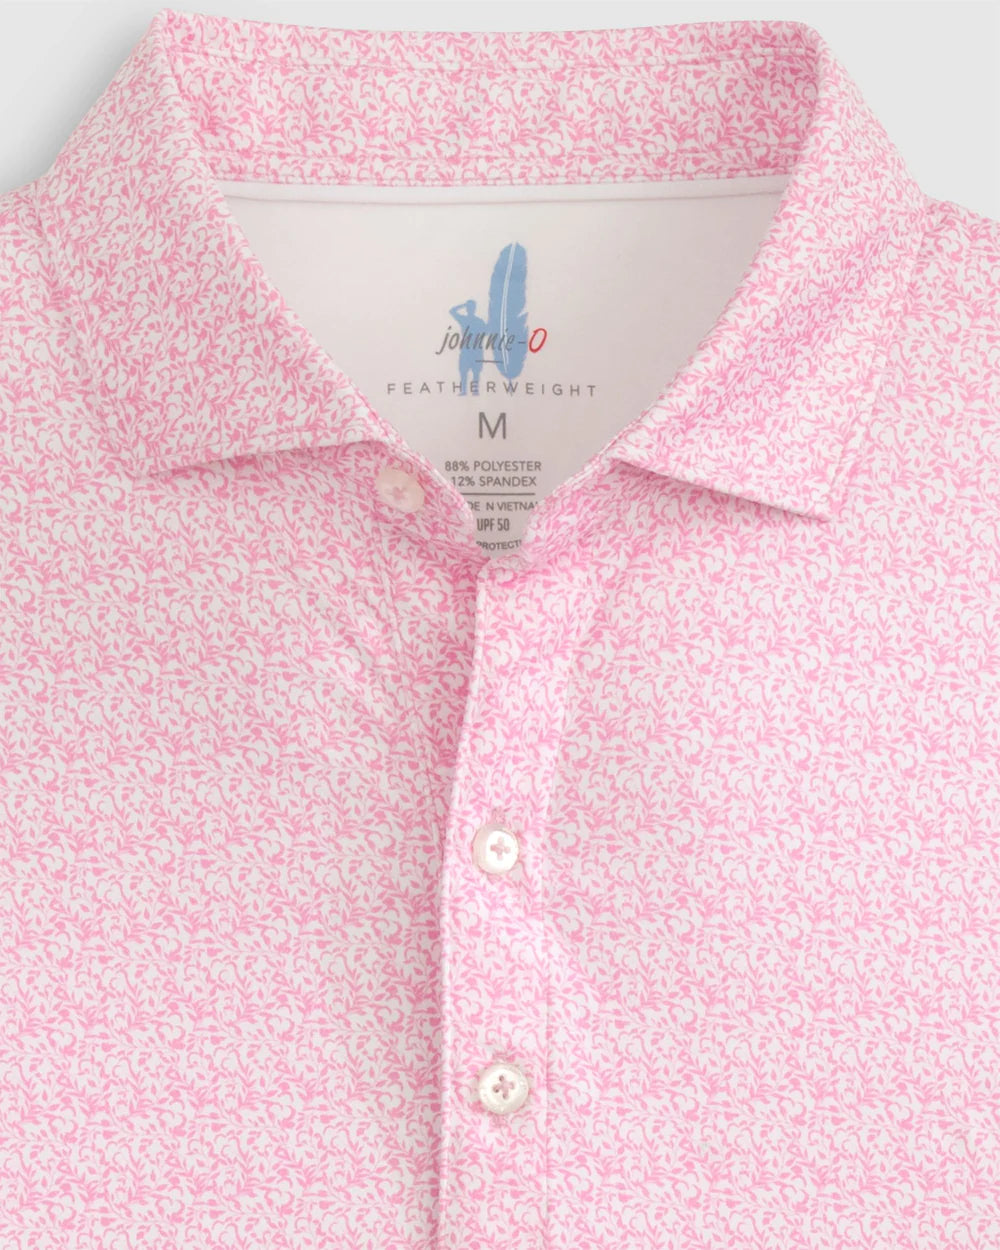 Made with our Featherweight Performance fabric, aka: the shirt you want on the hottest day of the year, this polo if perfect for the guy who likes to stay cool when the sun's at its peak.